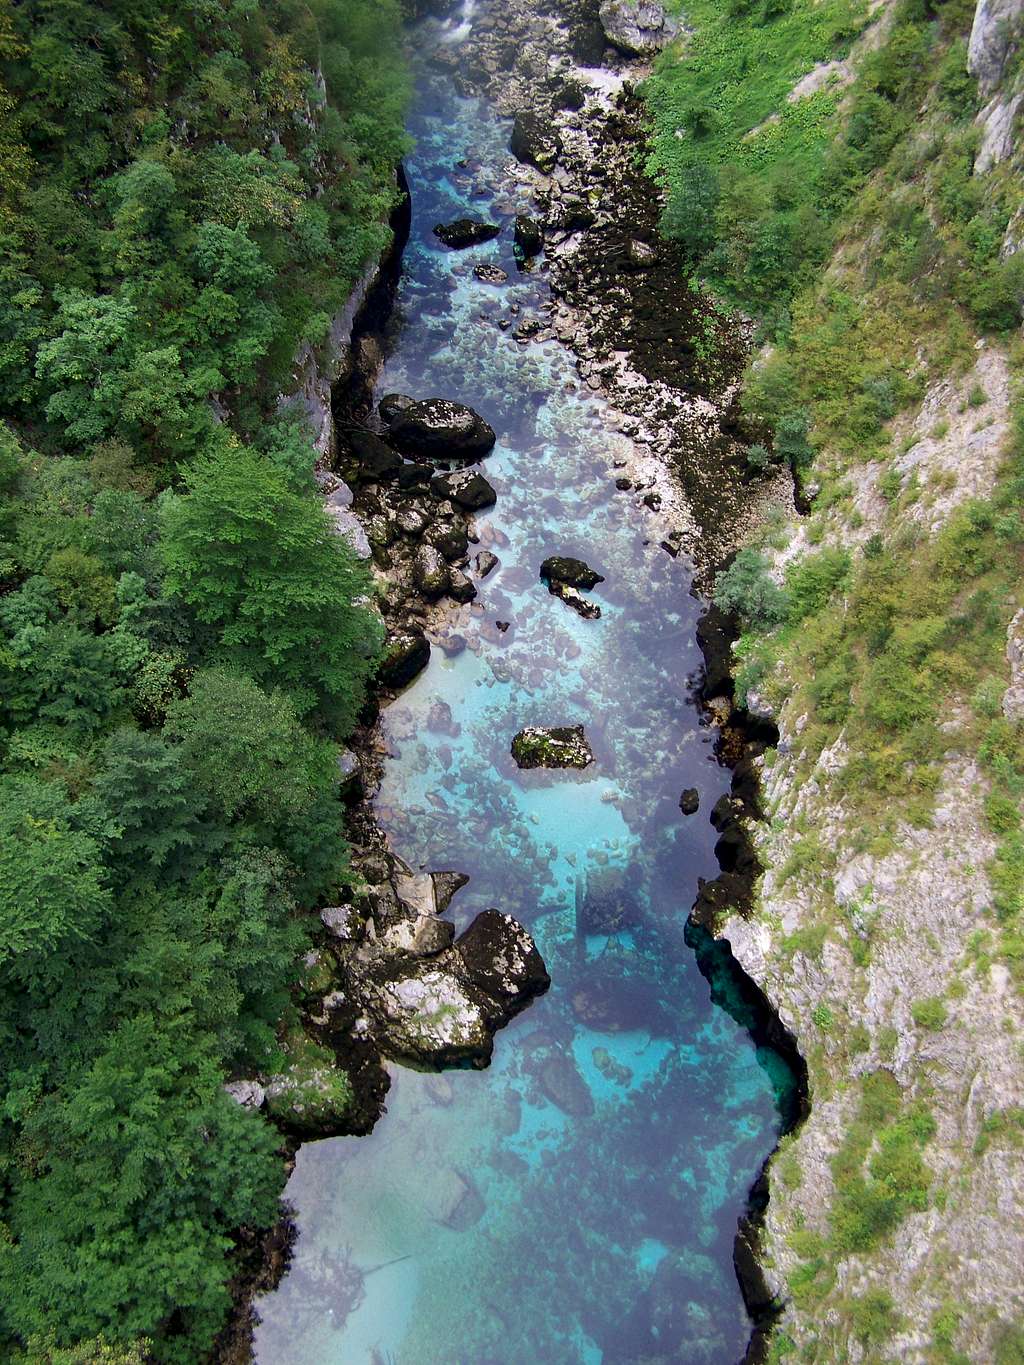 Piva river in the depth of its canyon